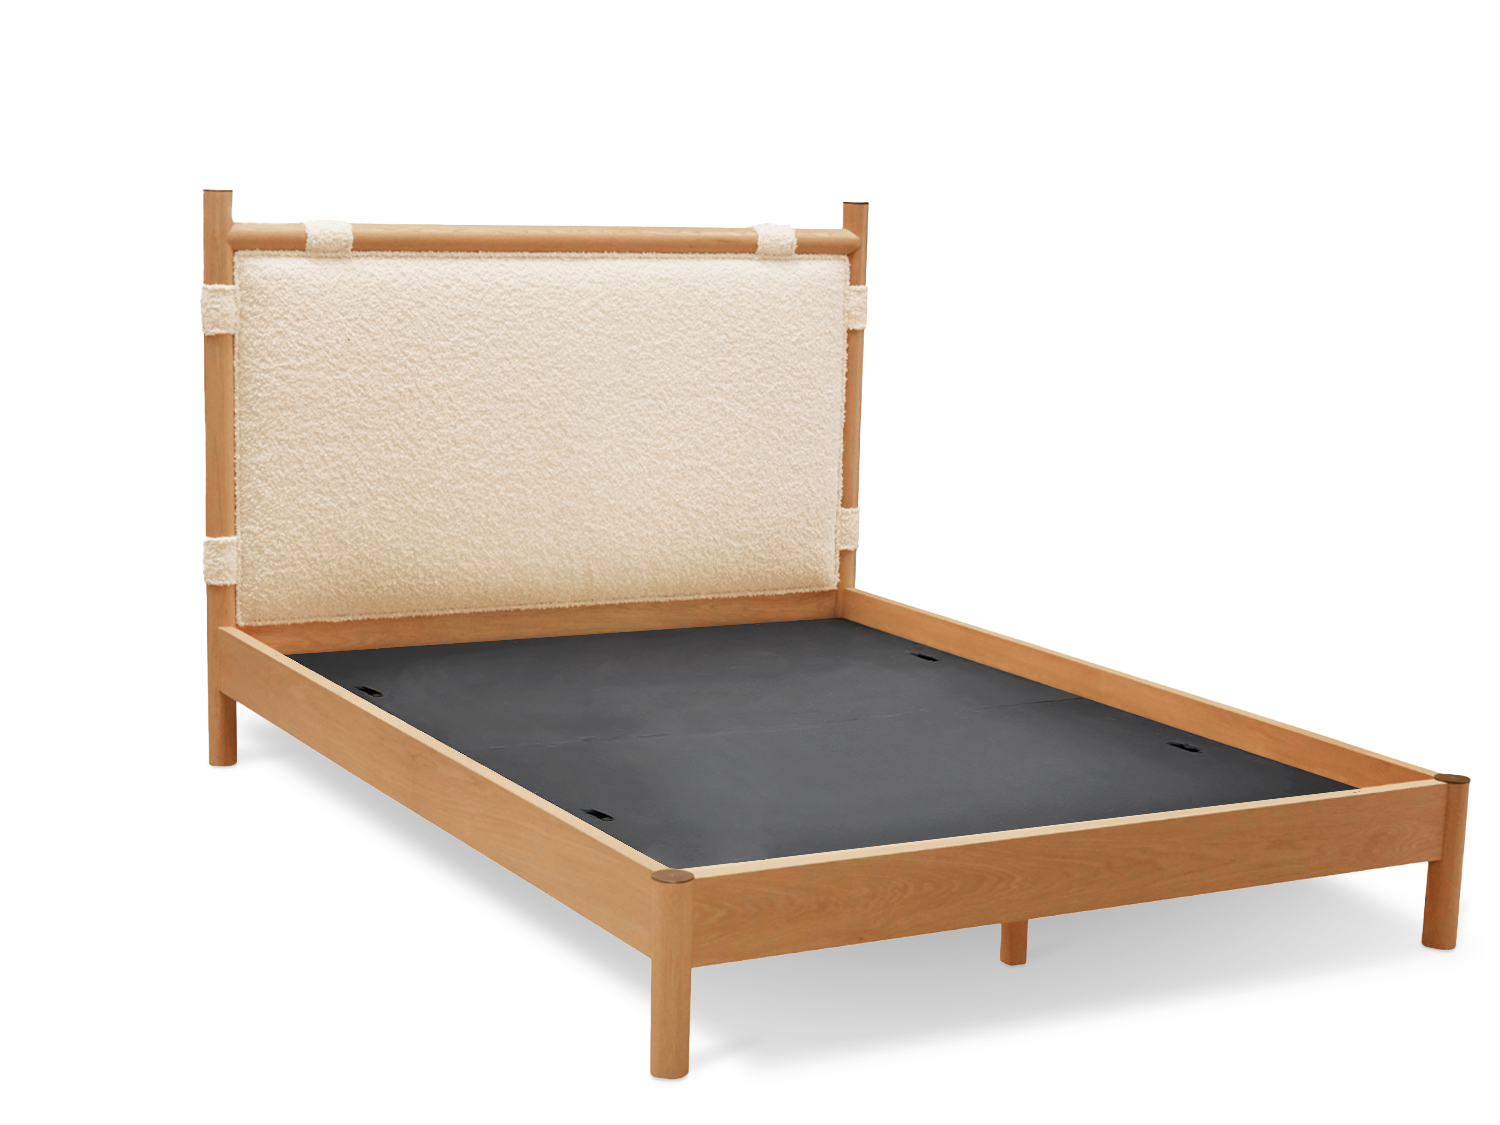 Chiselhurst Bed without Footboard